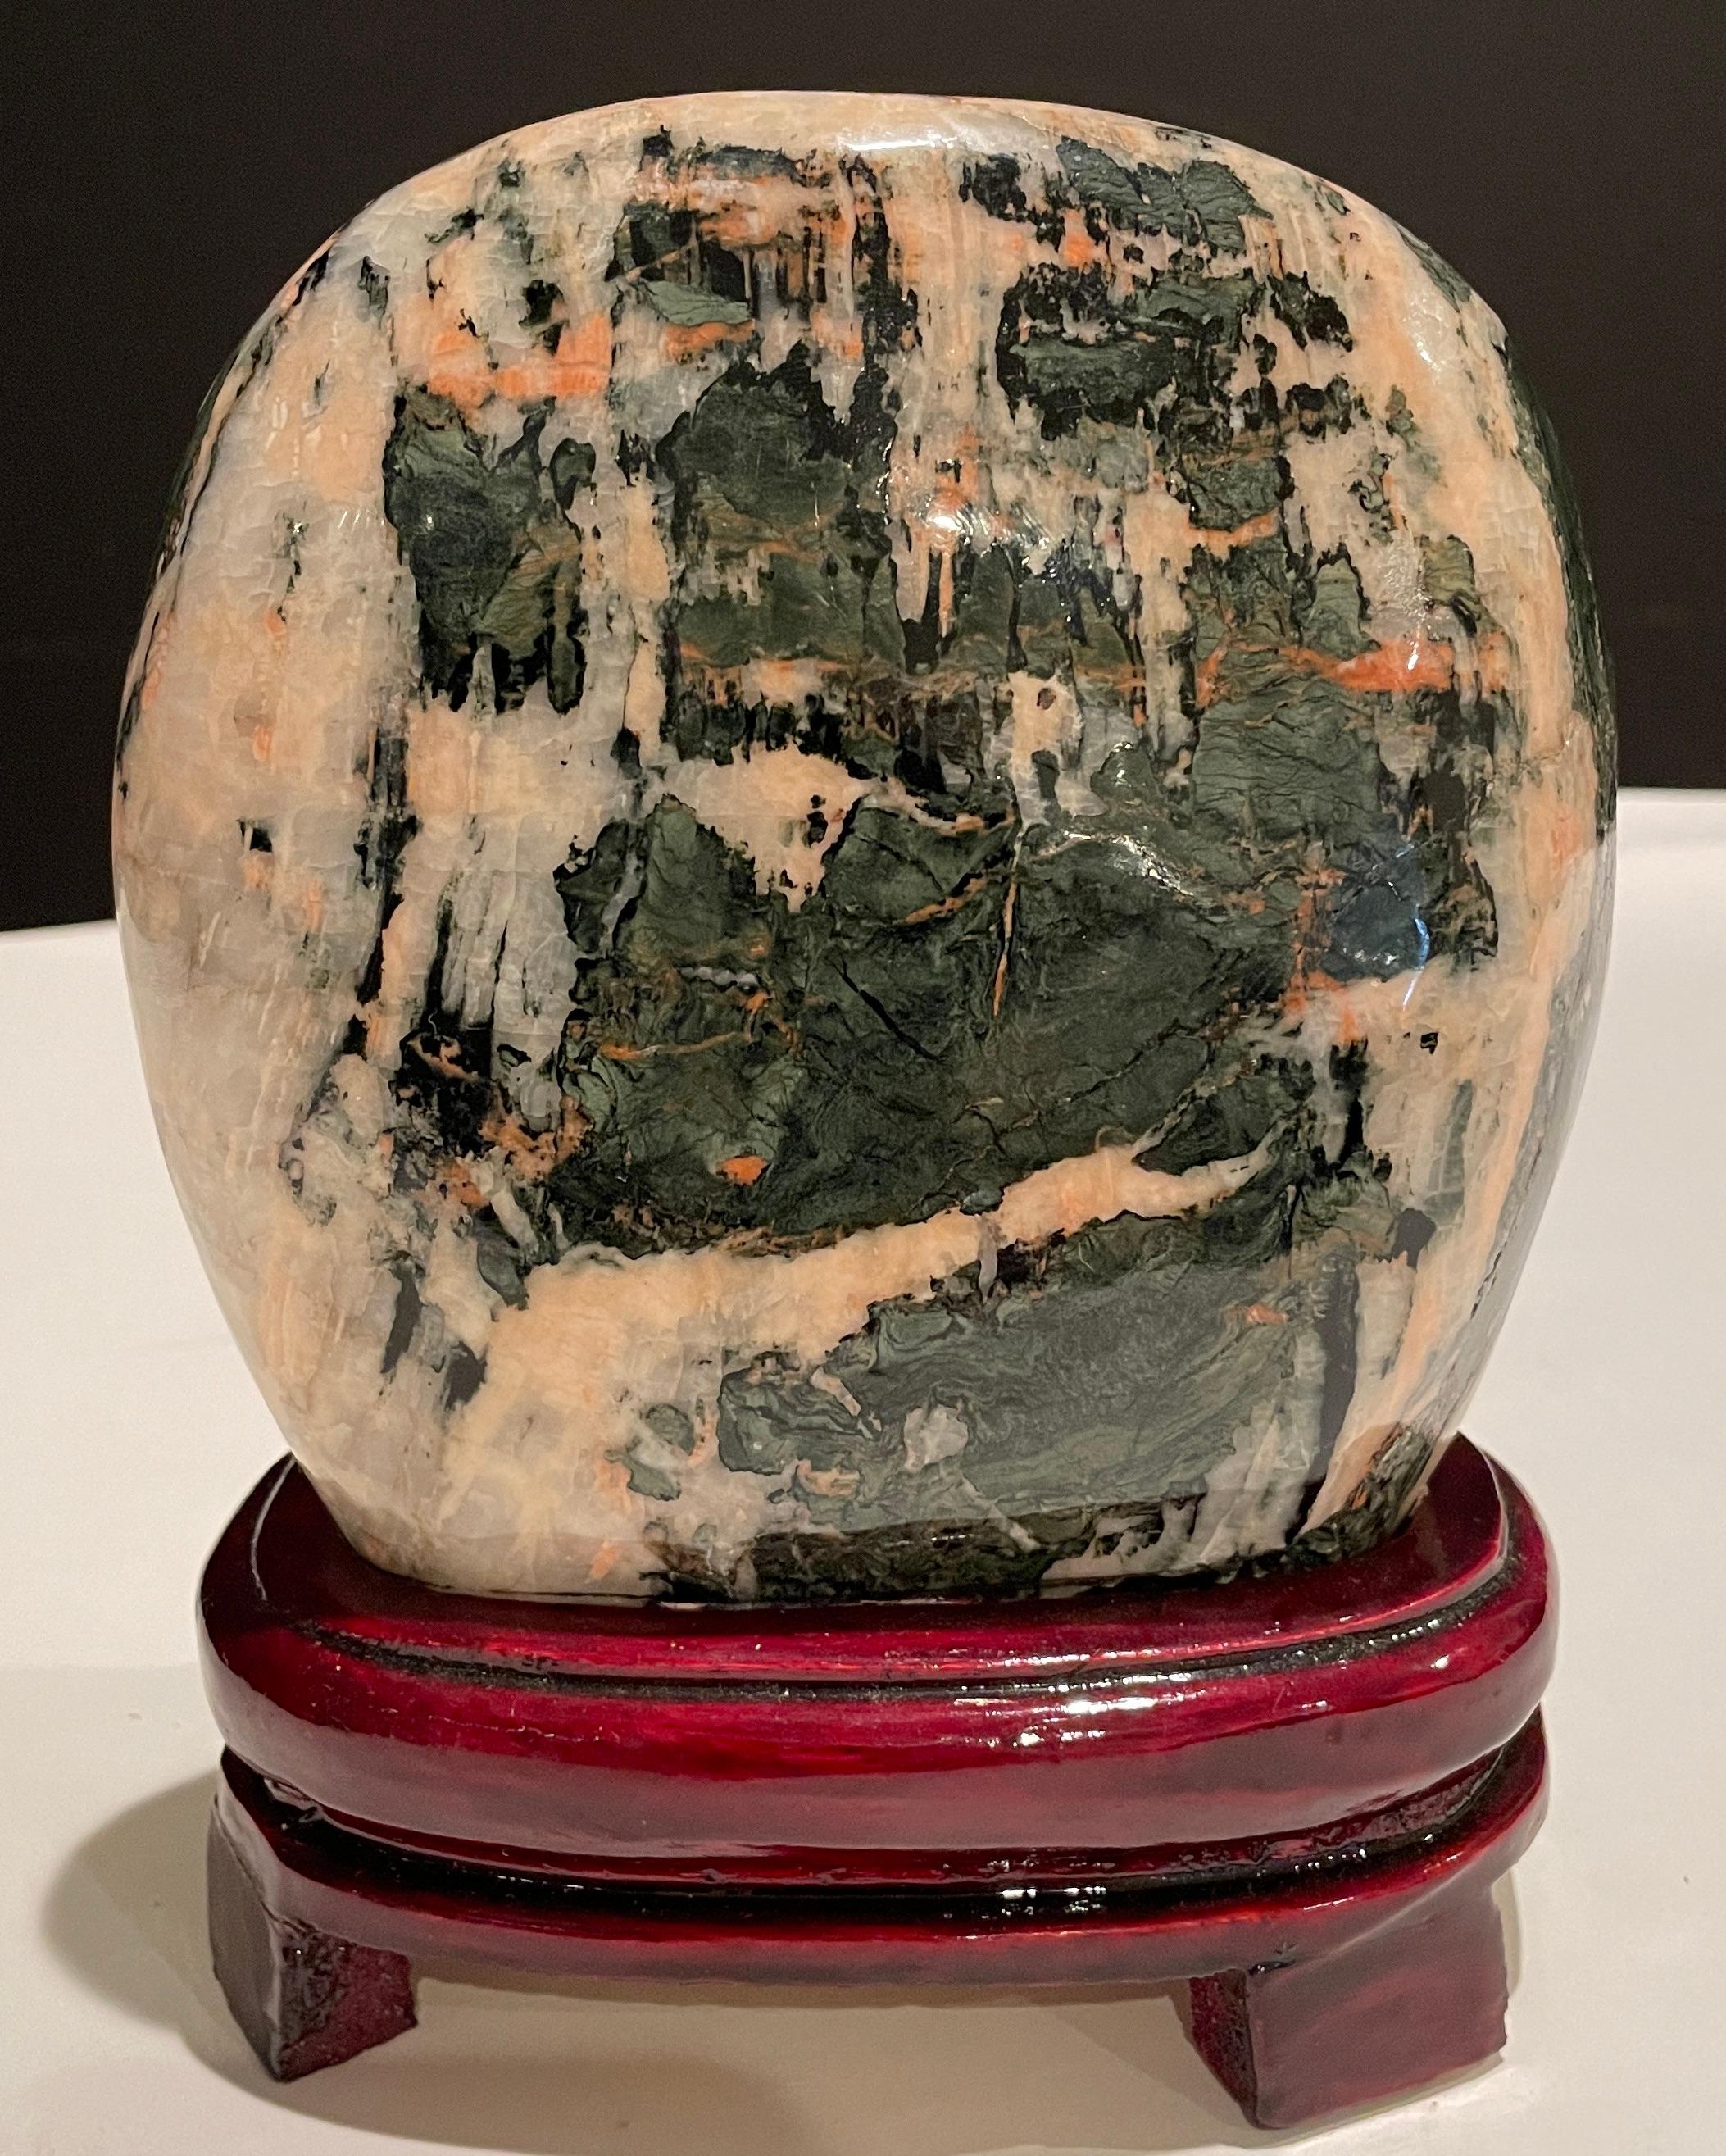 Chinese Scholar stone, Meditation stone, Appreciation stone or Dream stone. All names for this beautiful natural stone that when studied evokes and portrays many images.
Measure: H 6